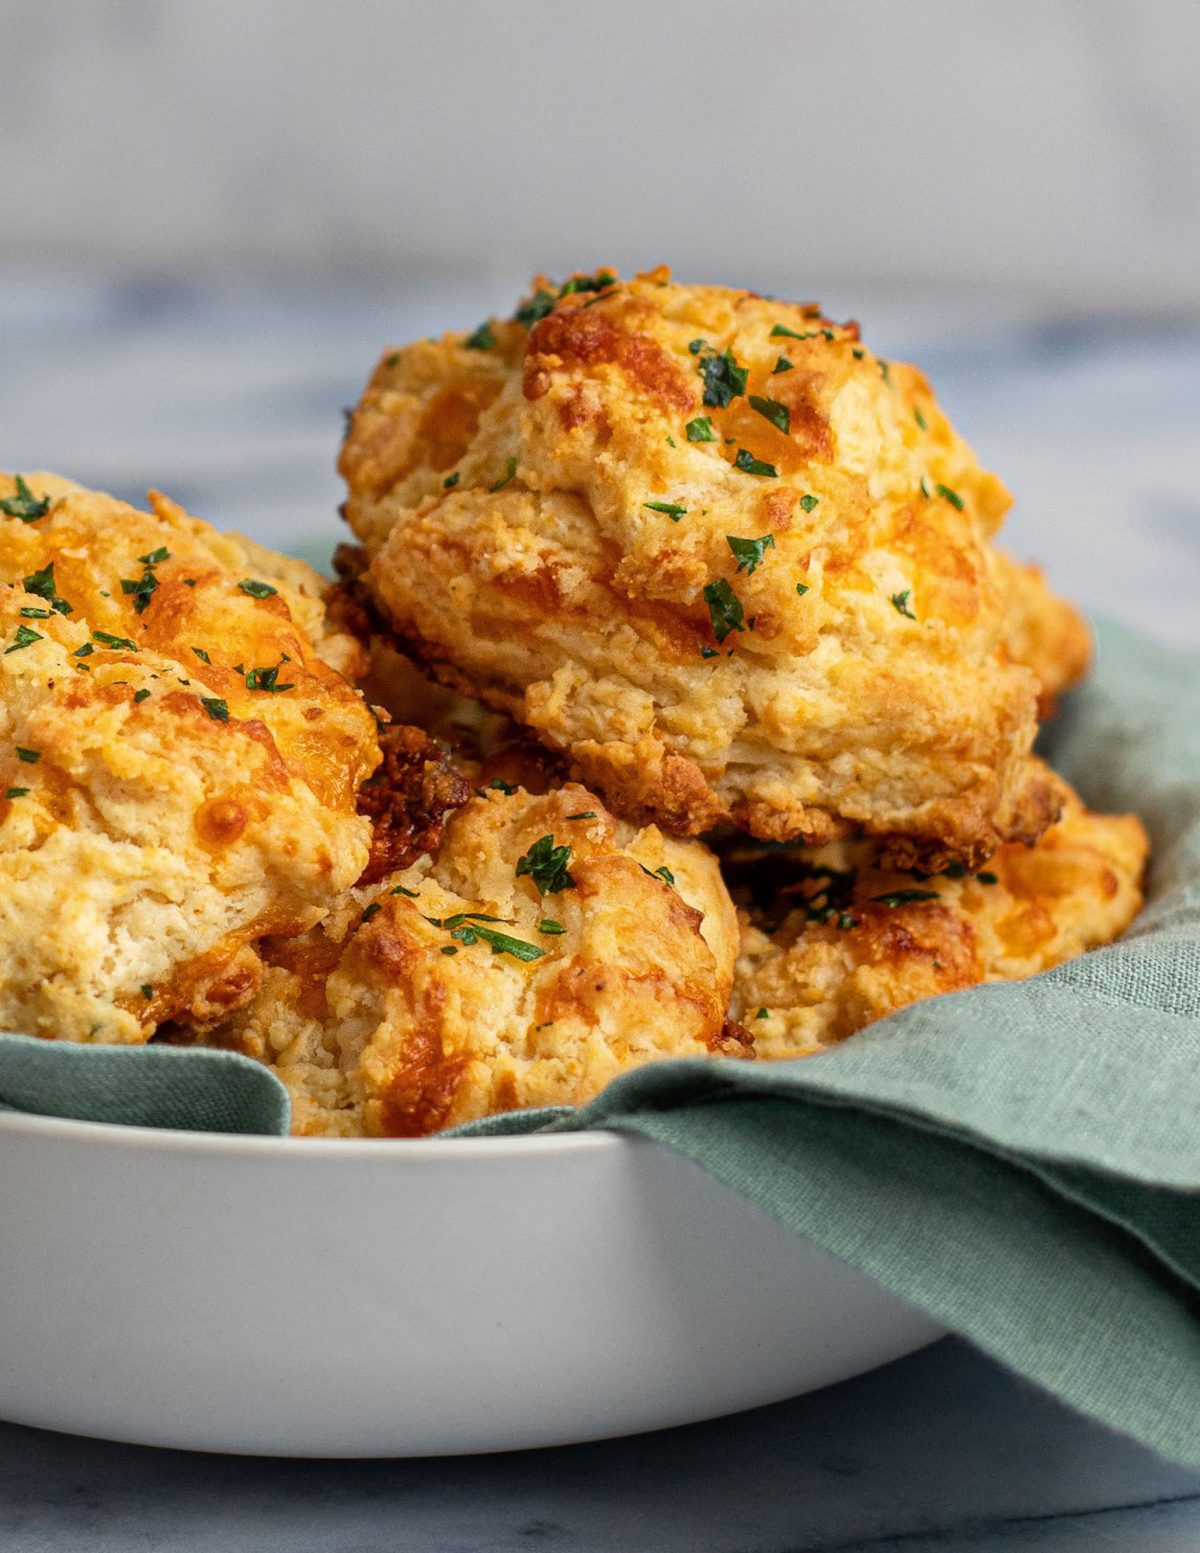 Cheddar Bay biscuits piled in a bowl.